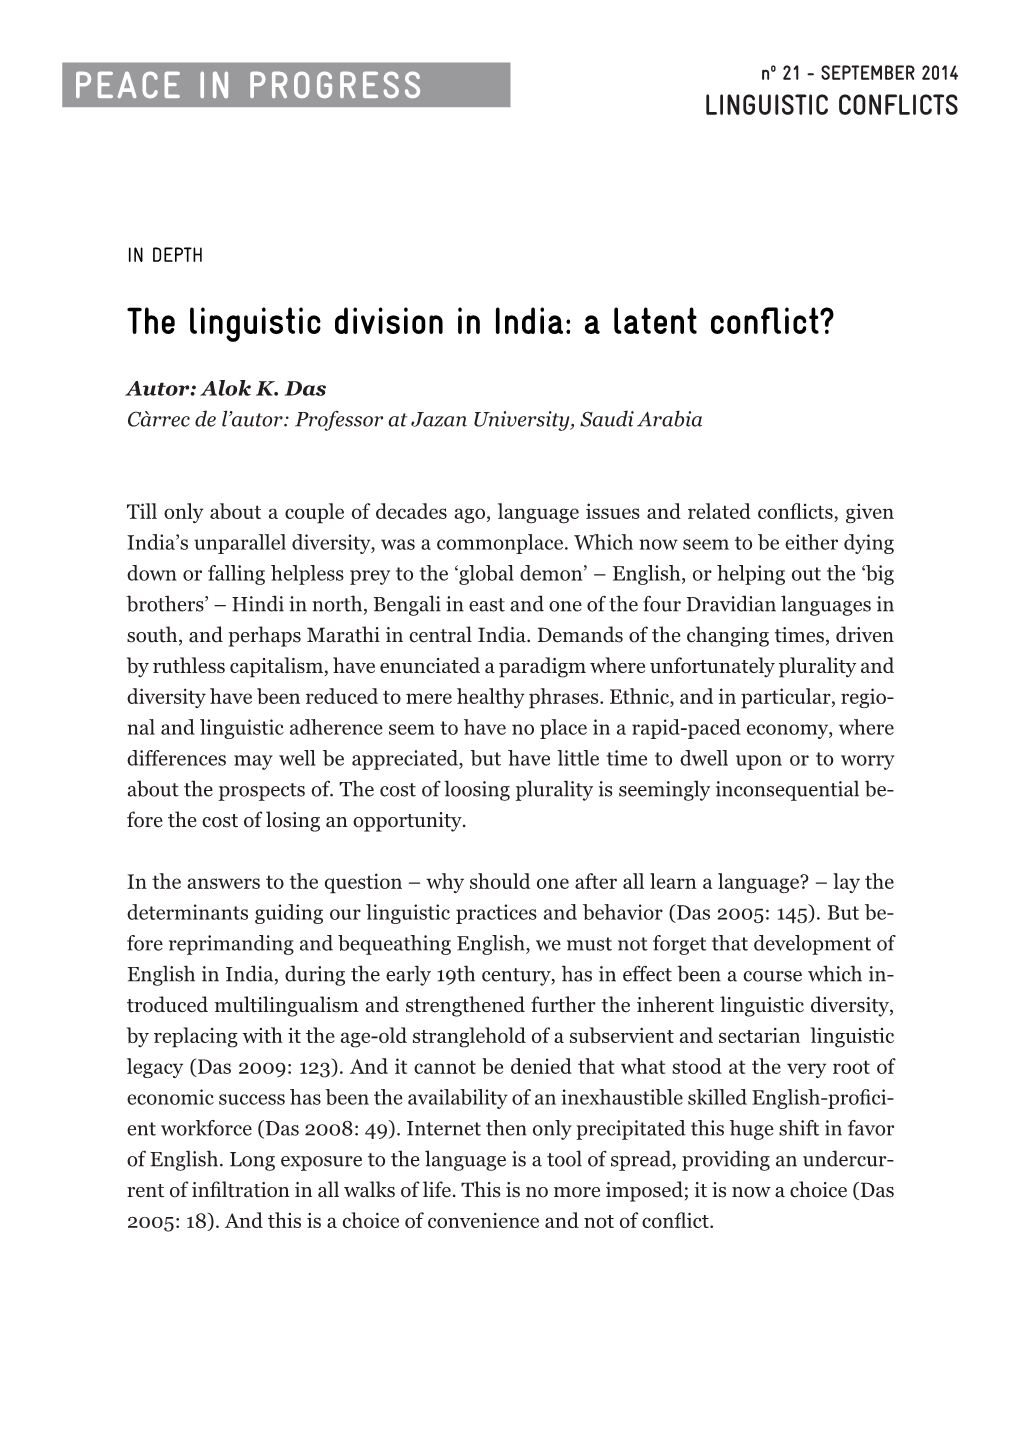 The Linguistic Division in India: a Latent Conflict?